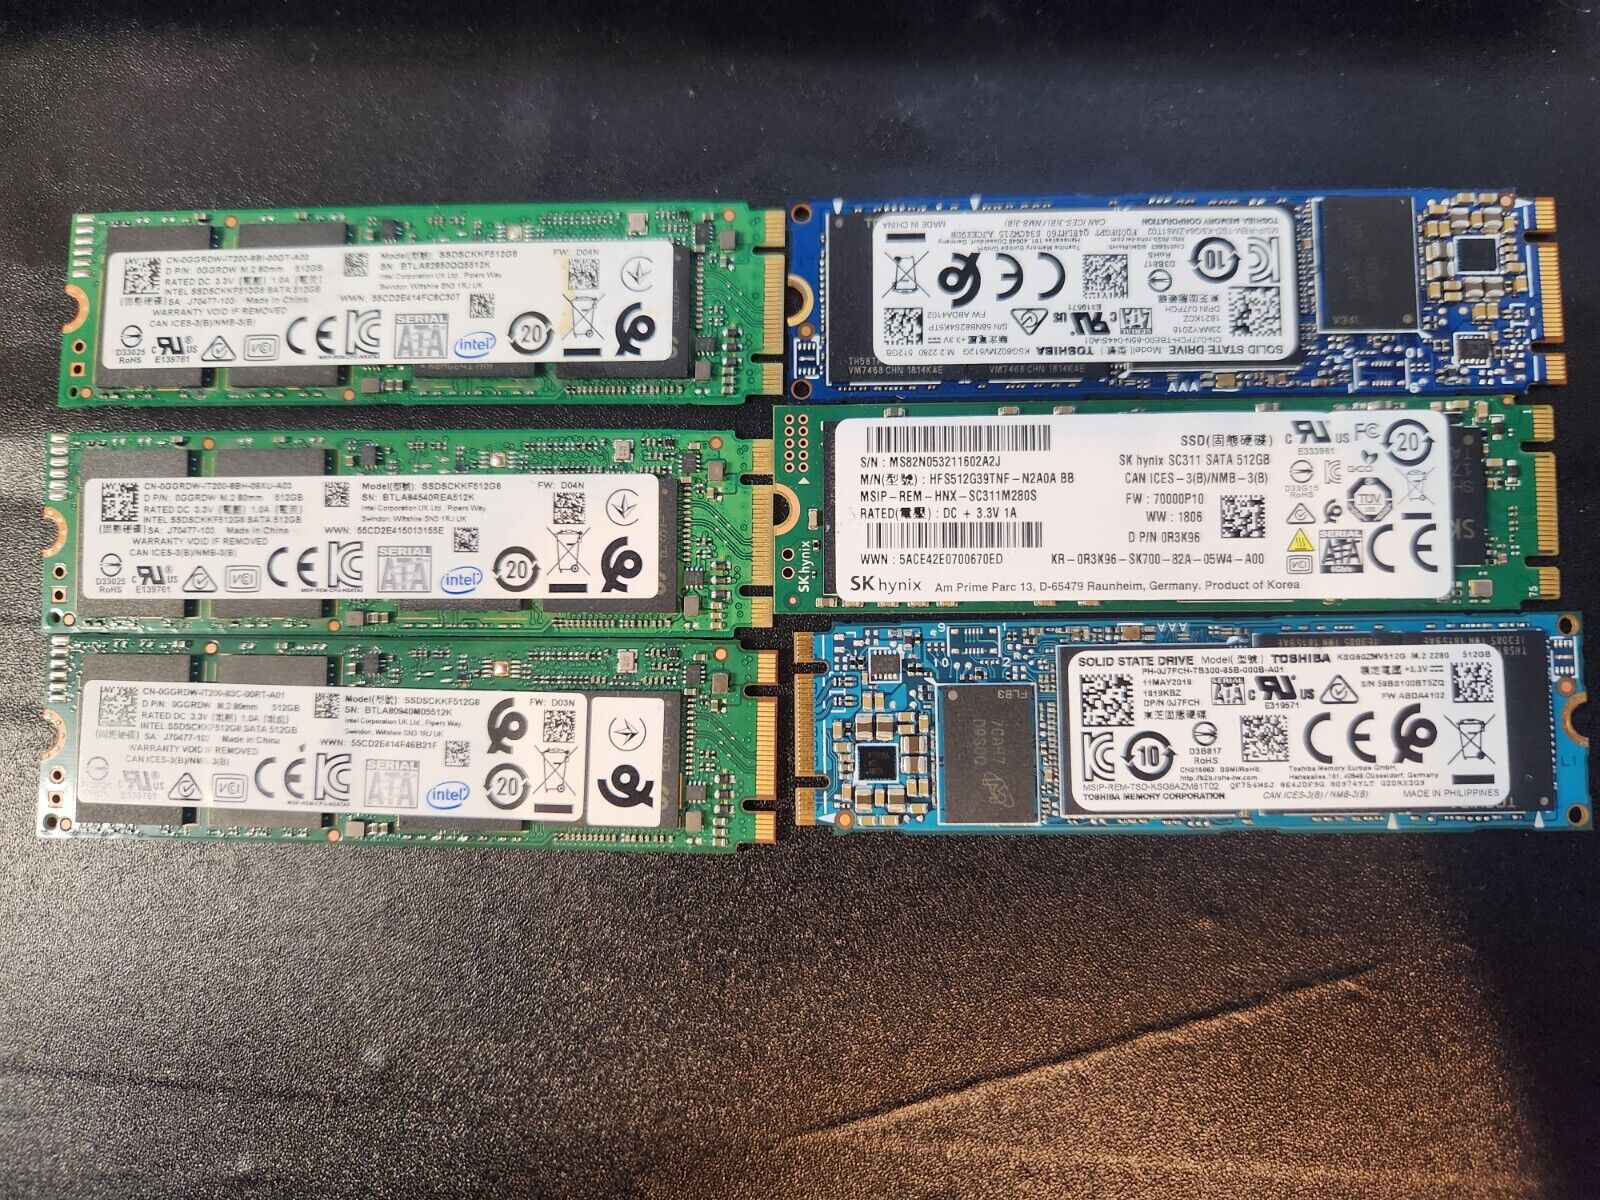  512GB, Internal, 2280mm  M.2 Solid State Drives "TESTED" 